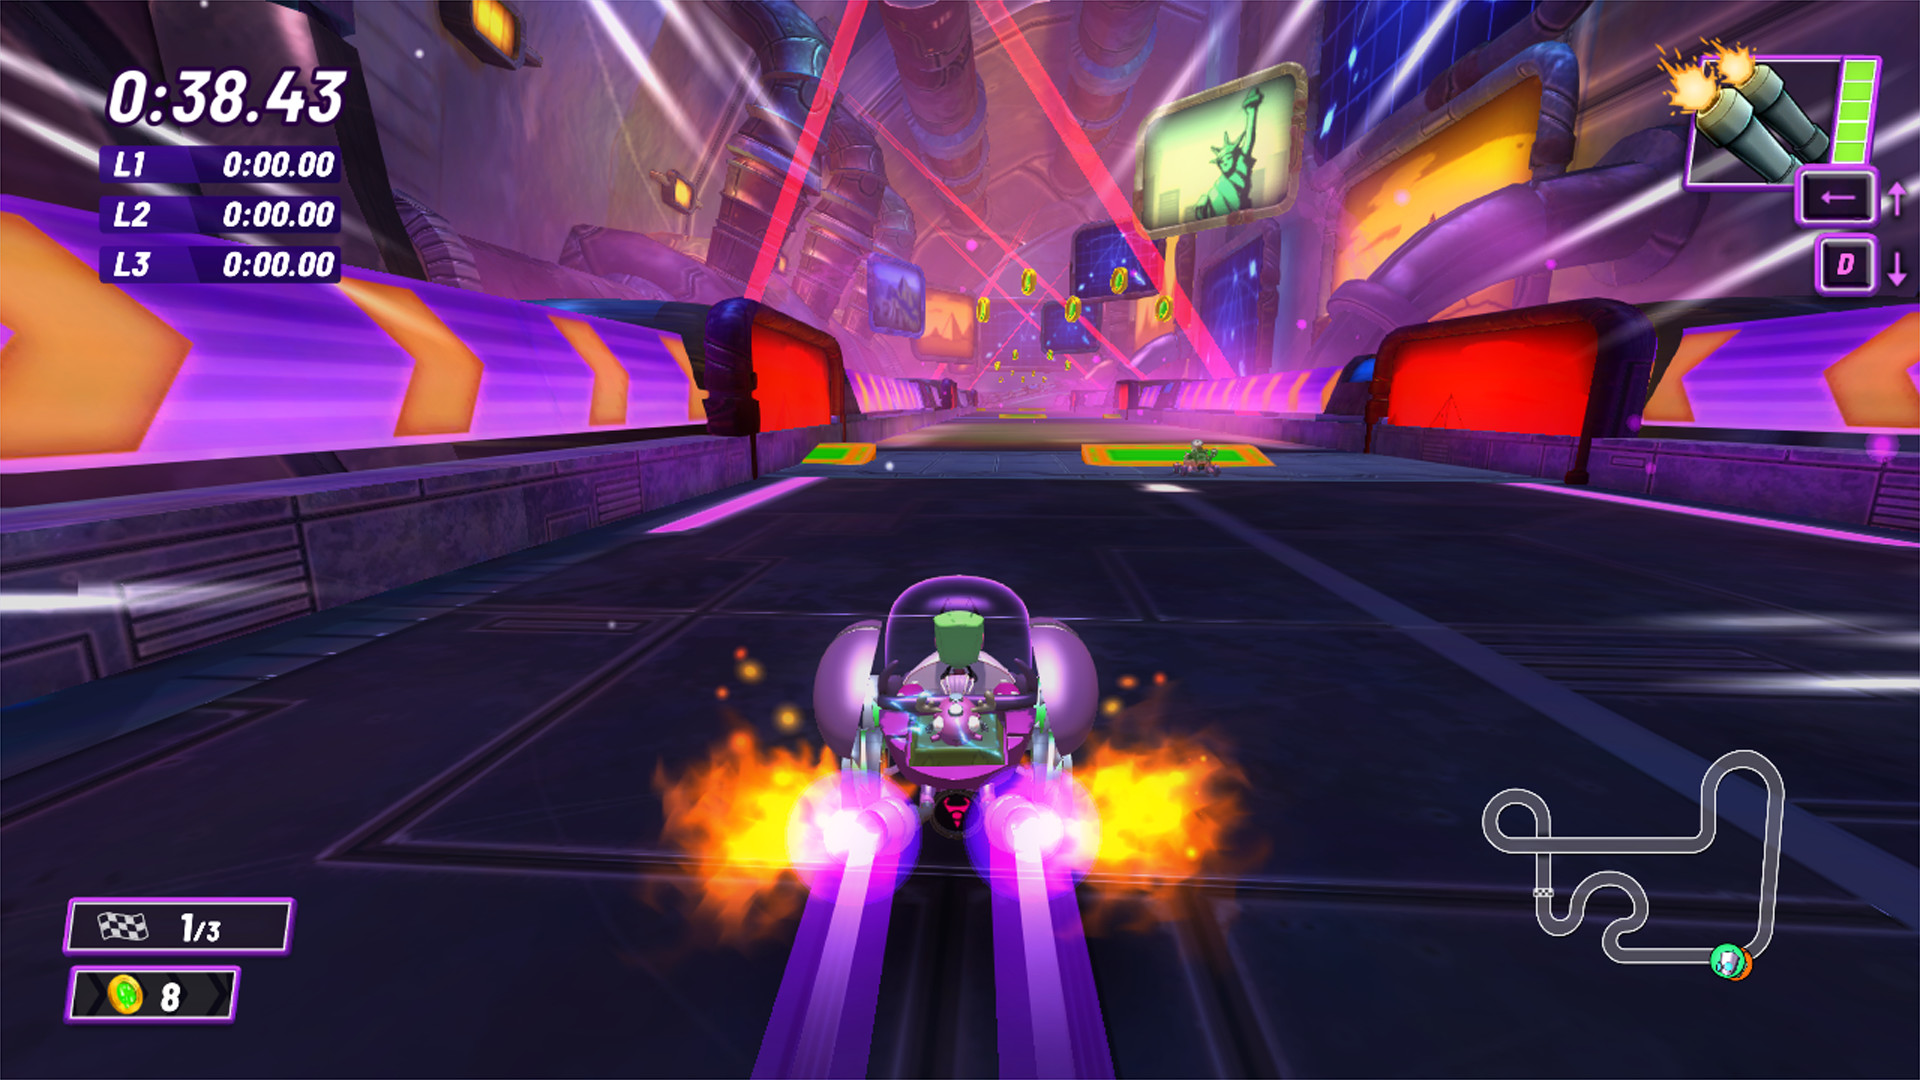 Download Nickelodeon Kart Racers 2: Grand Prix For PC for free, the game size is – 2.1GB